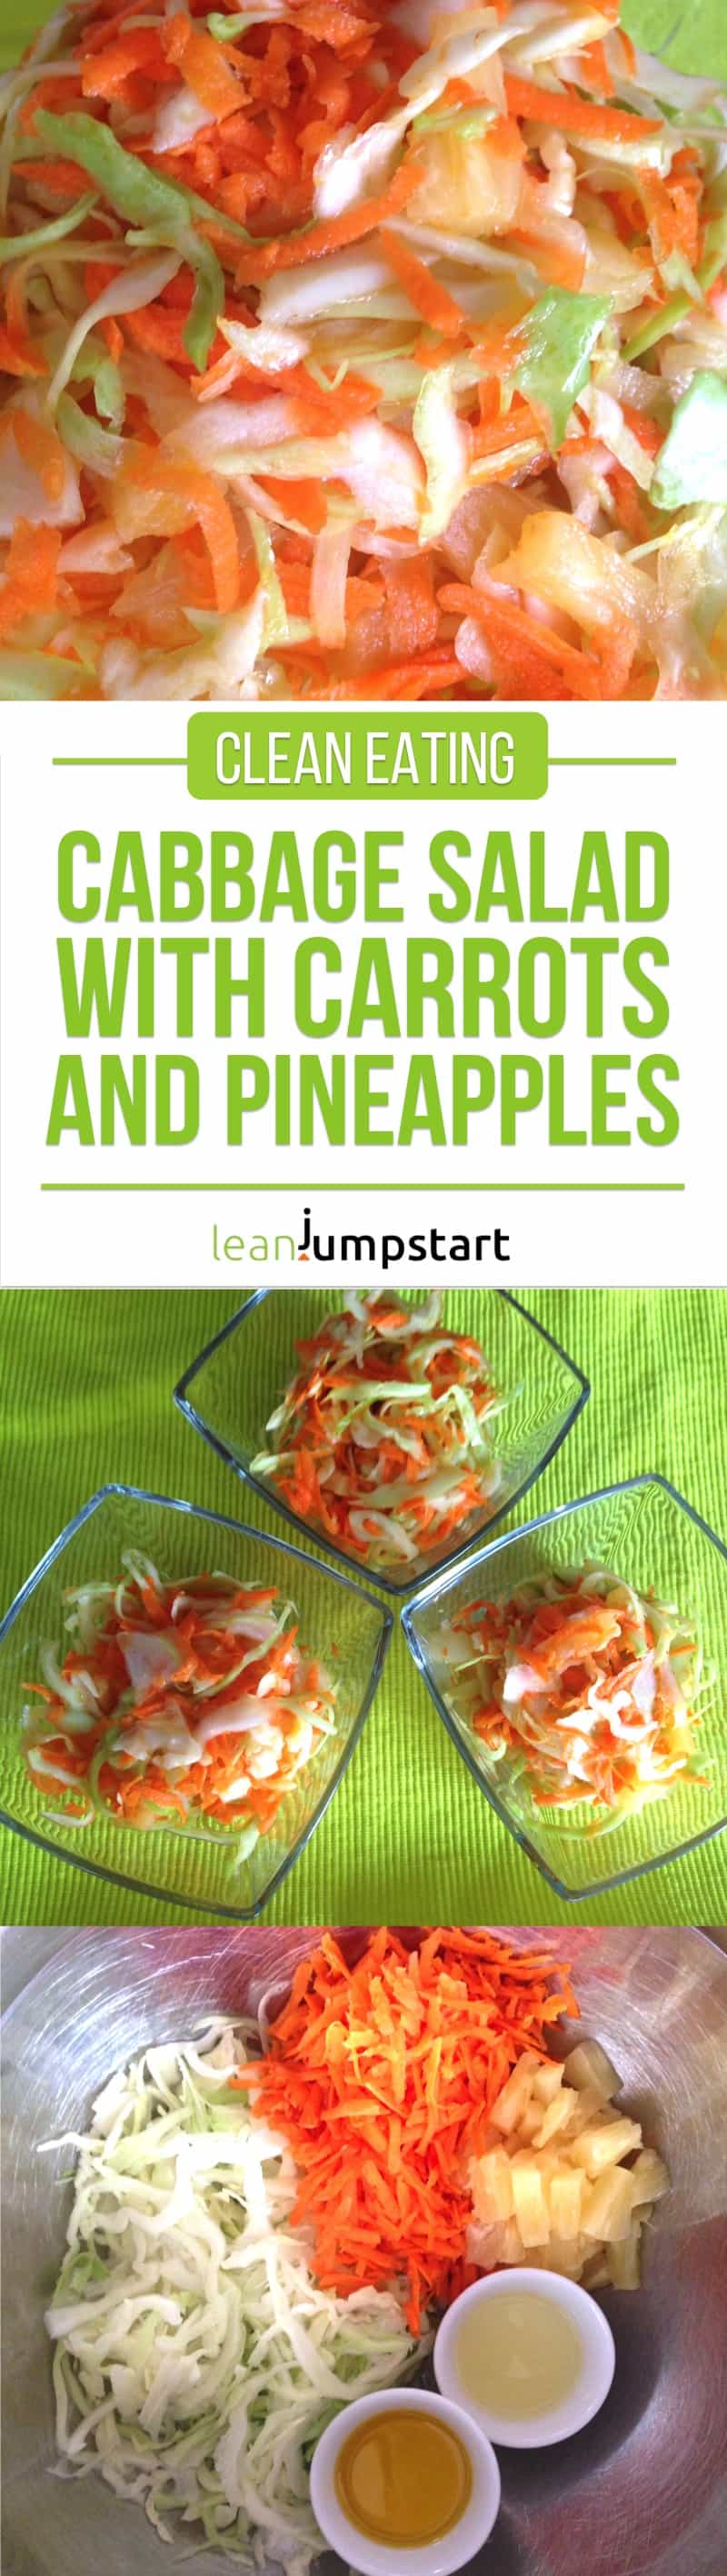 cabbage salad with carrots and pineapples